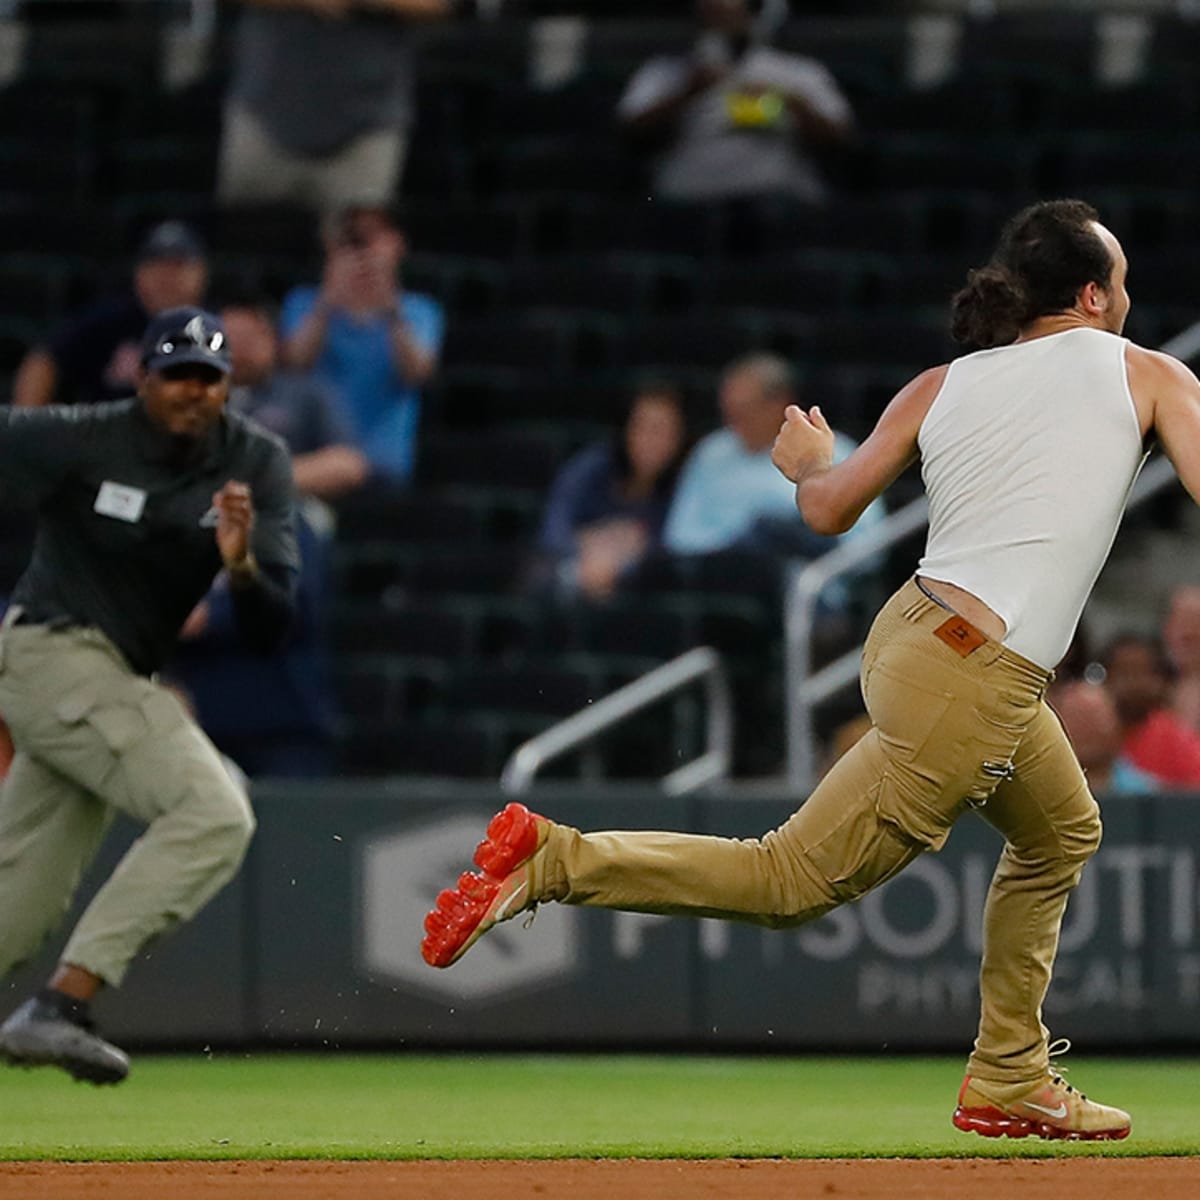 Fans run onto field and one makes contact with Atlanta Braves star